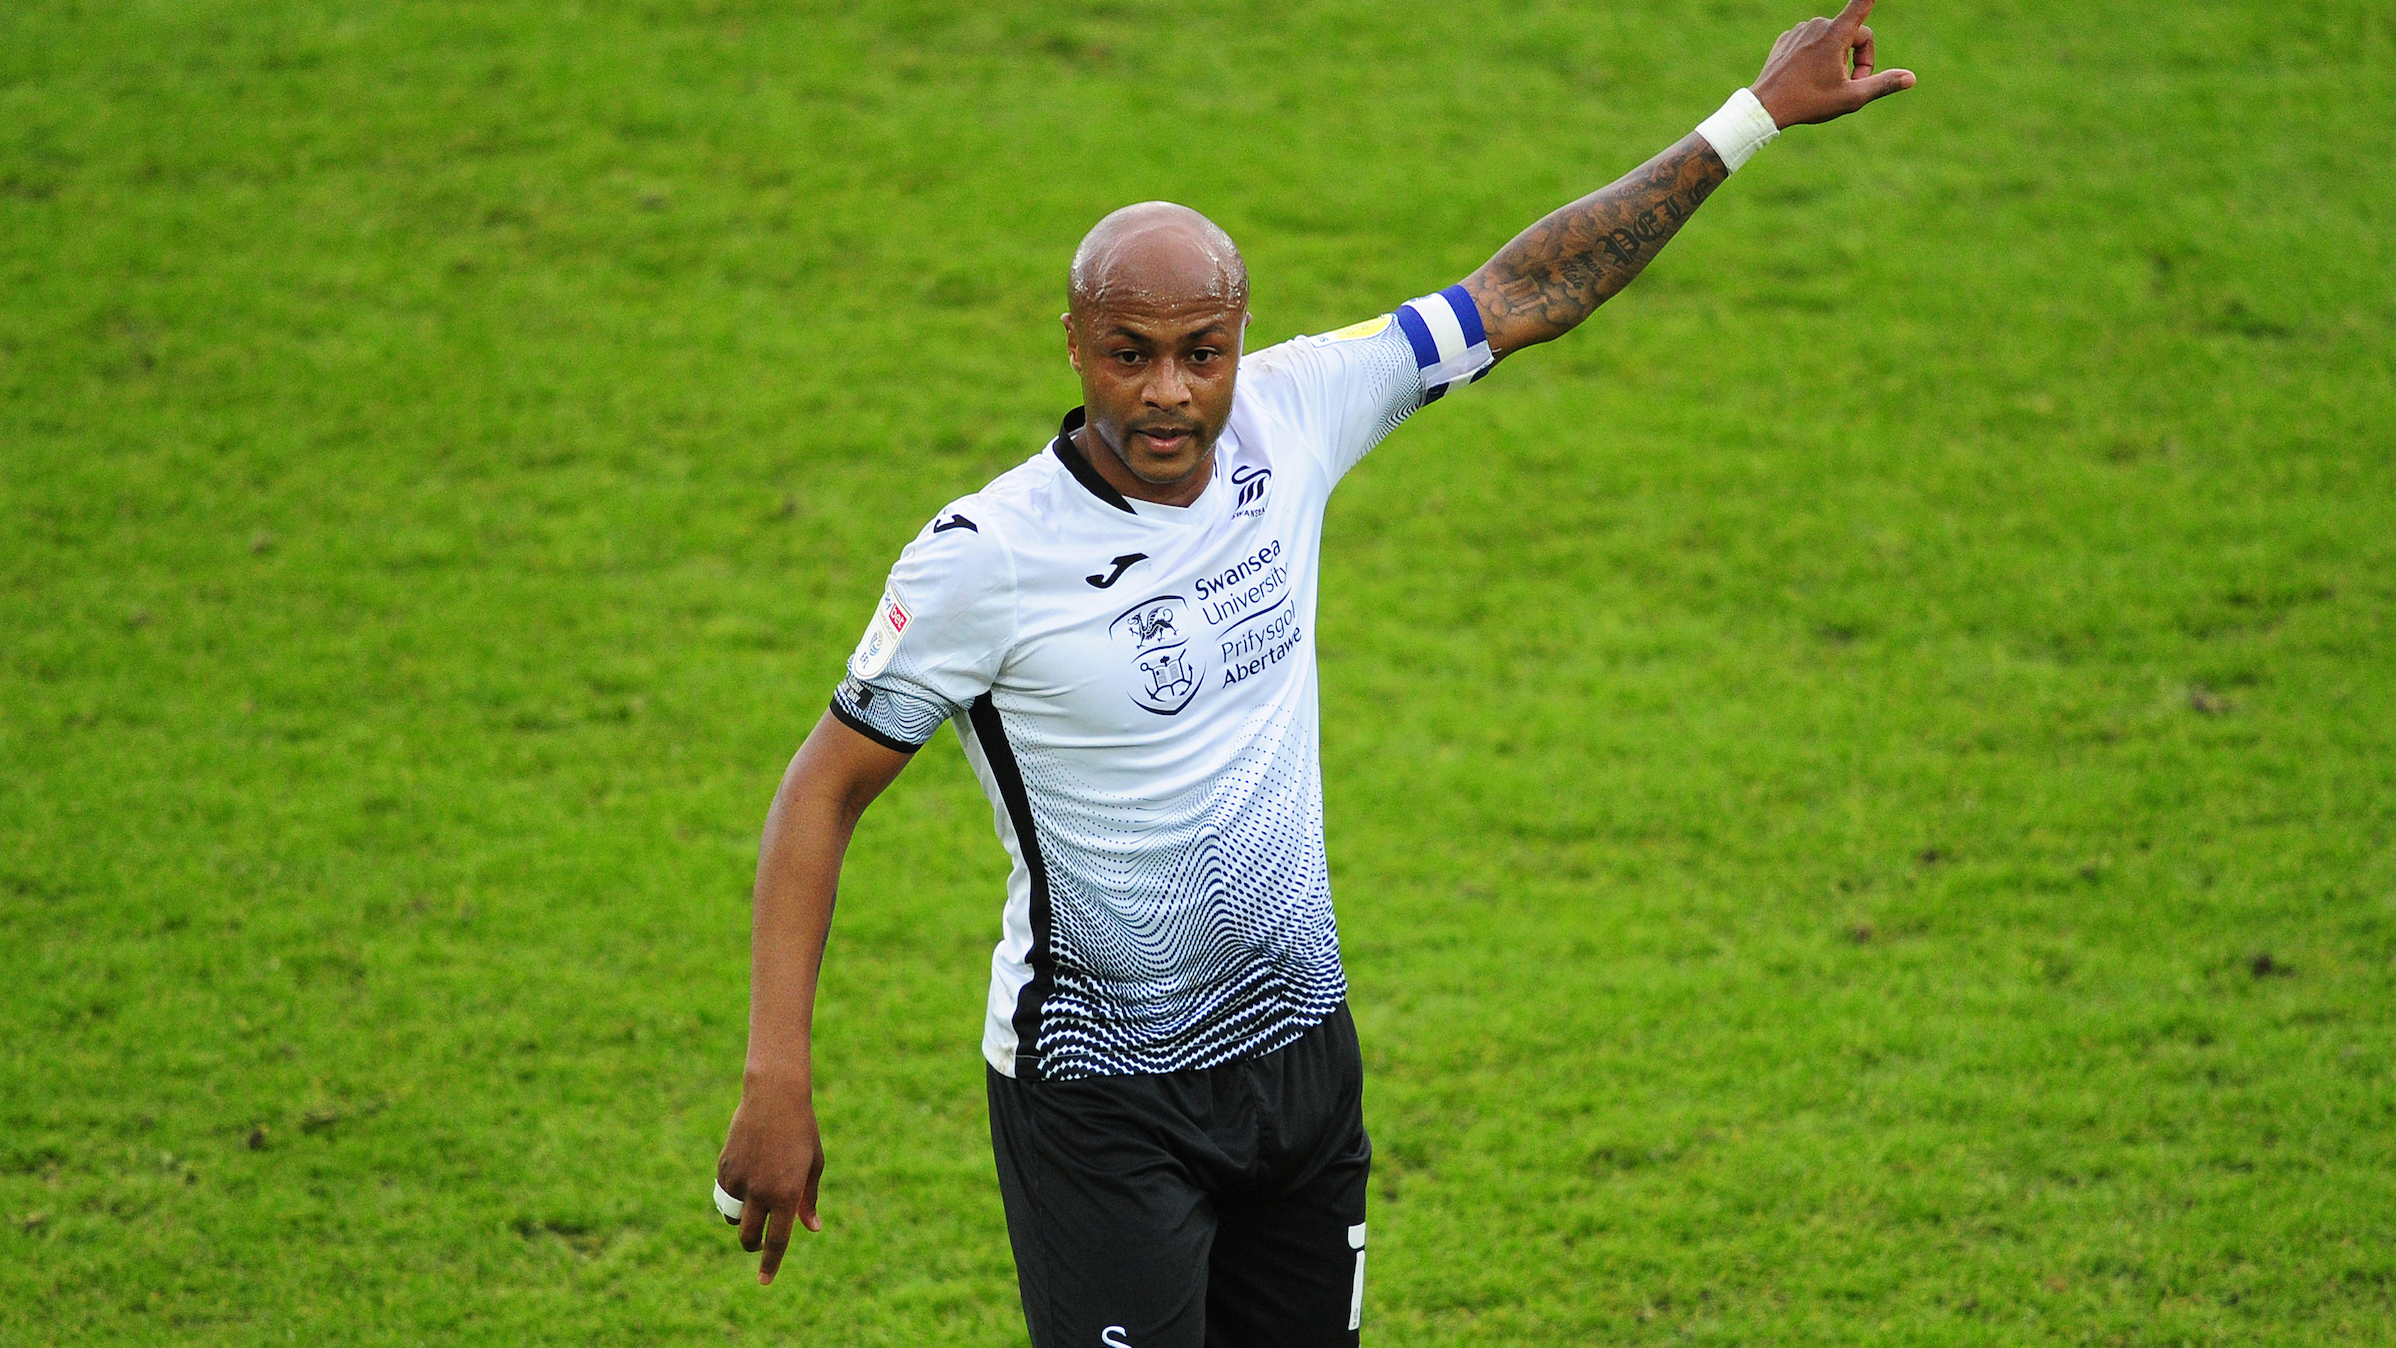 Ghana skipper Andre Ayew set to become one of Africa's highest-paid players ahead of Al Sadd move